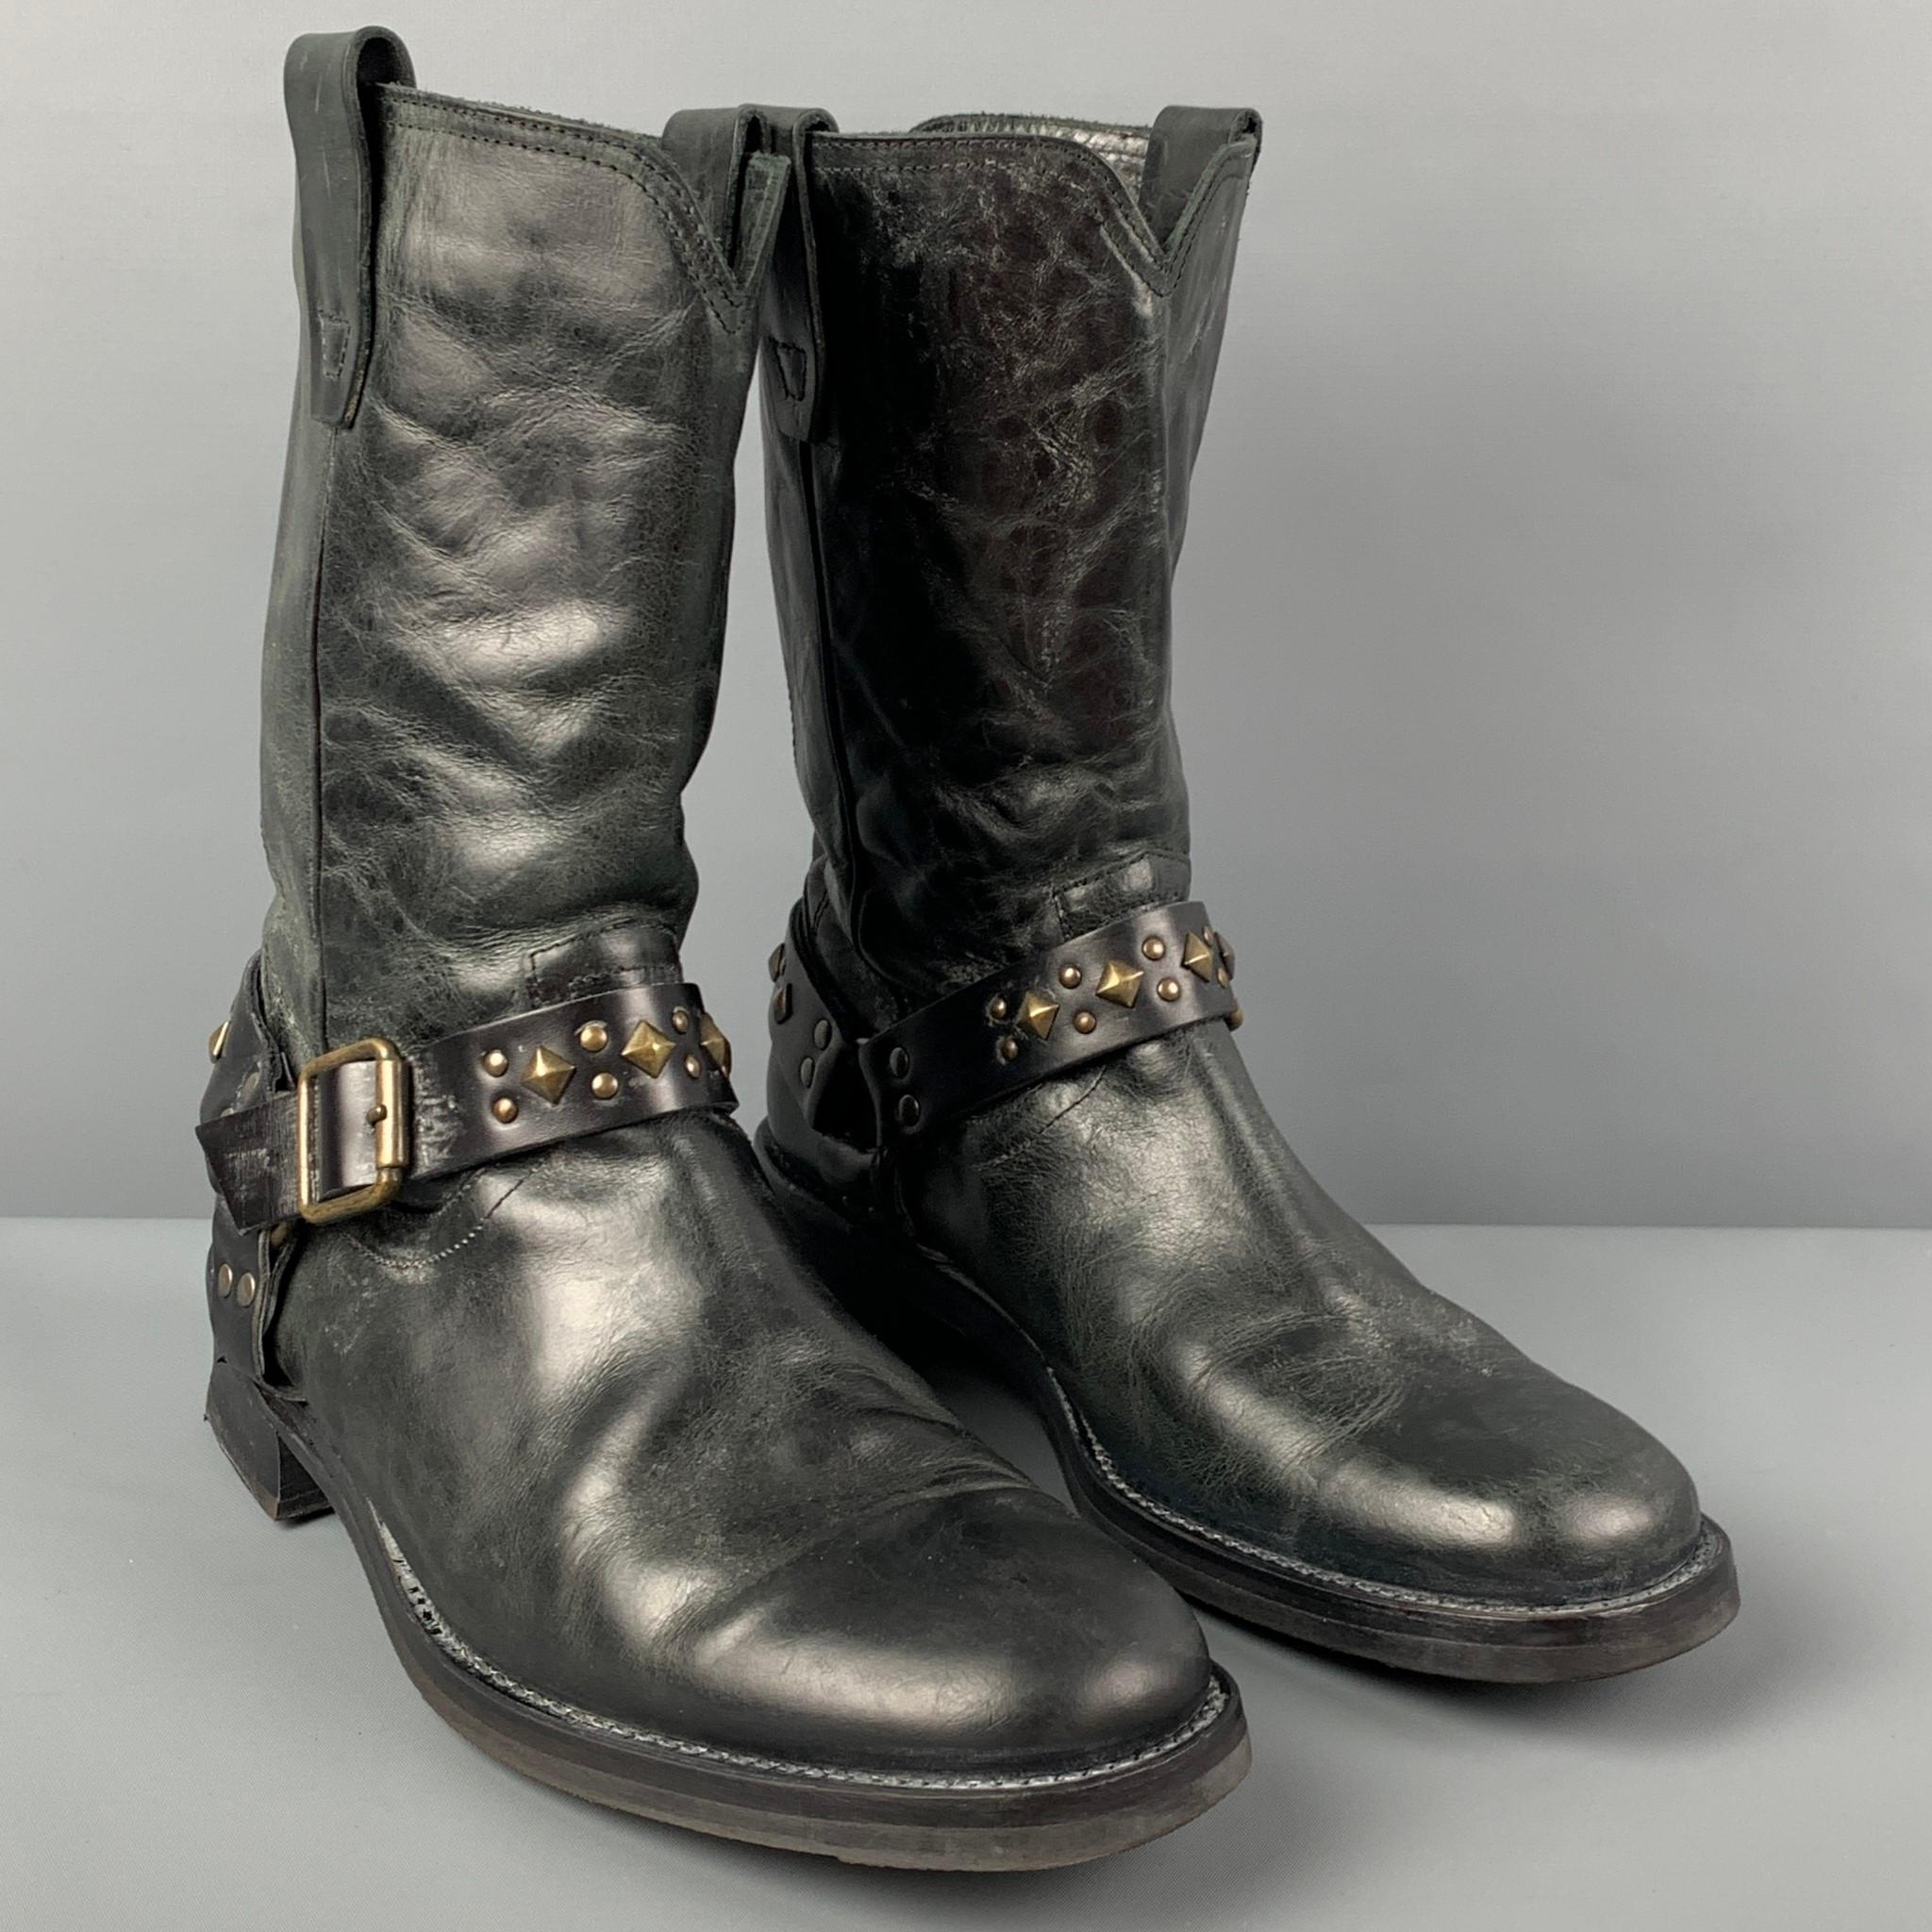 JOHN VARVATOS boots comes in a black leather featuring a buckle strap detail, studded embellishment, oil resistant, and a round toe. Made in Italy. 

Very Good Pre-Owned Condition.
Marked: 9.5

Measurements:

Length: 12.5 in.
Width: 4 in.
Height: